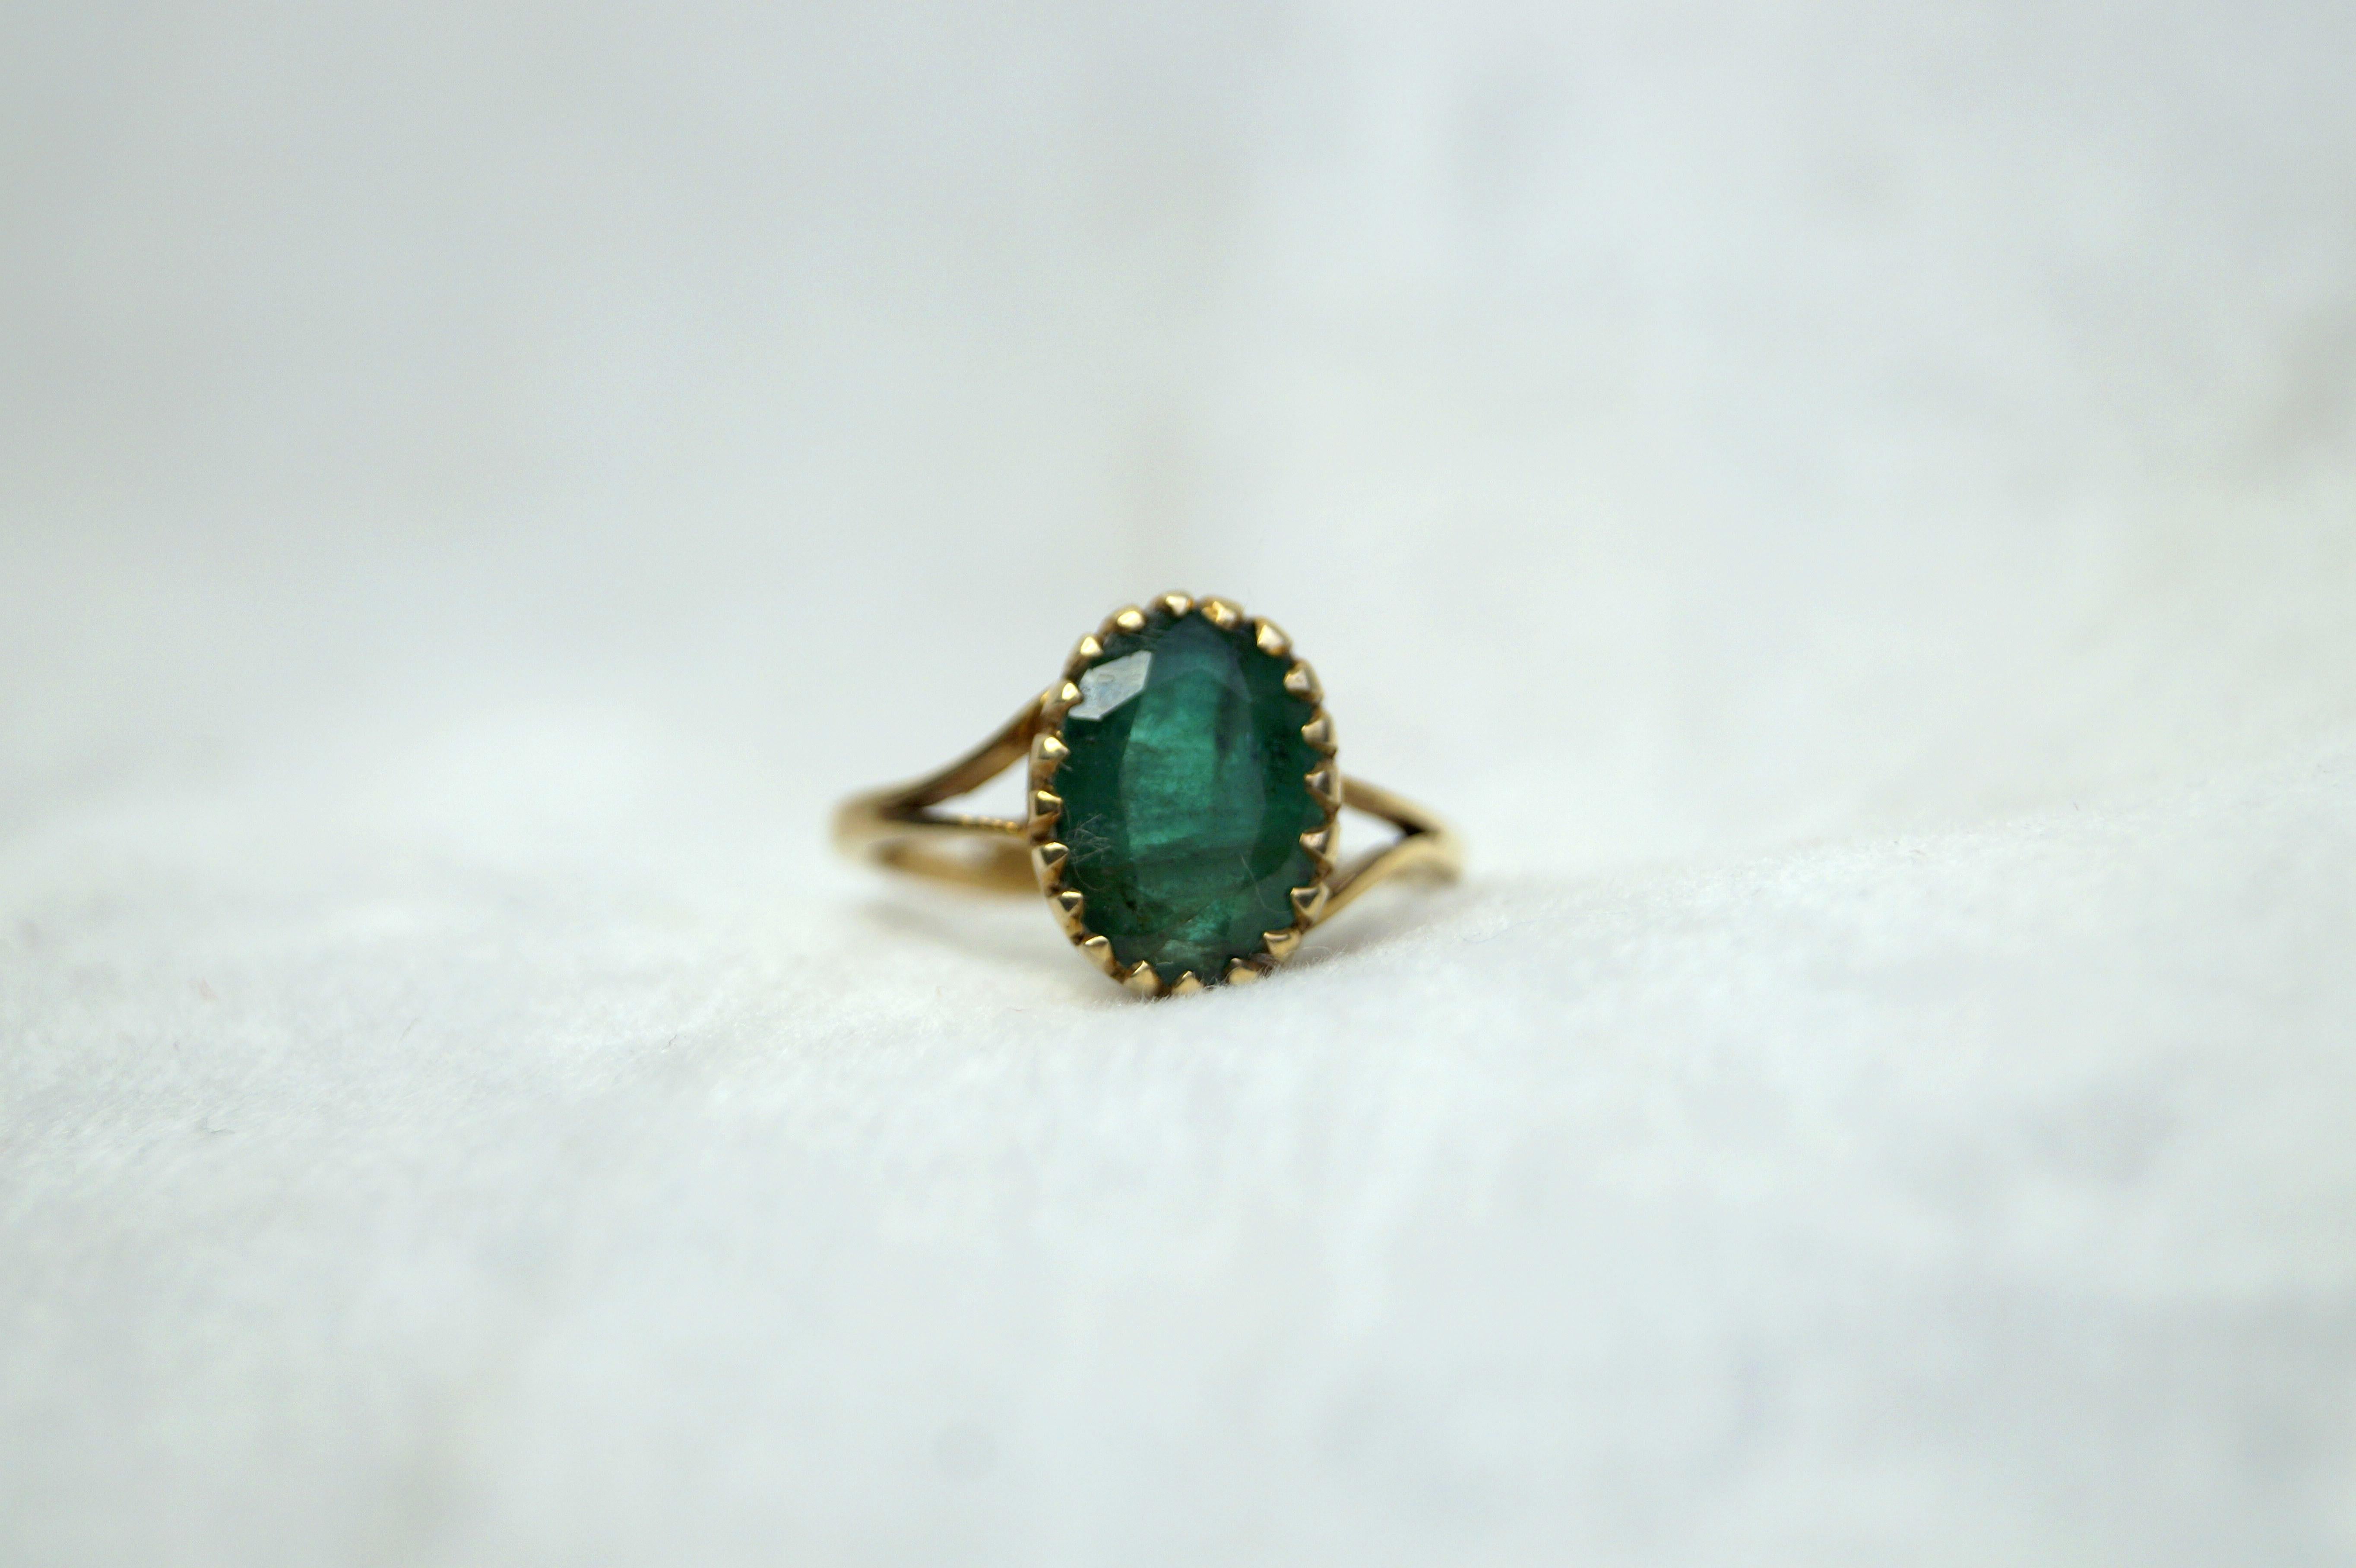 *DETAILS- (ITEM no=p234)
-------------------------------------------------
- Gold Purity: 14k ( 585 ) (Hallmark)
- Gold Color: Yellow
-------------------------------------------------
-Gemstone-Natural Emerald (Real)
- Gem Stone Wt. : 2.45ctw
- No.